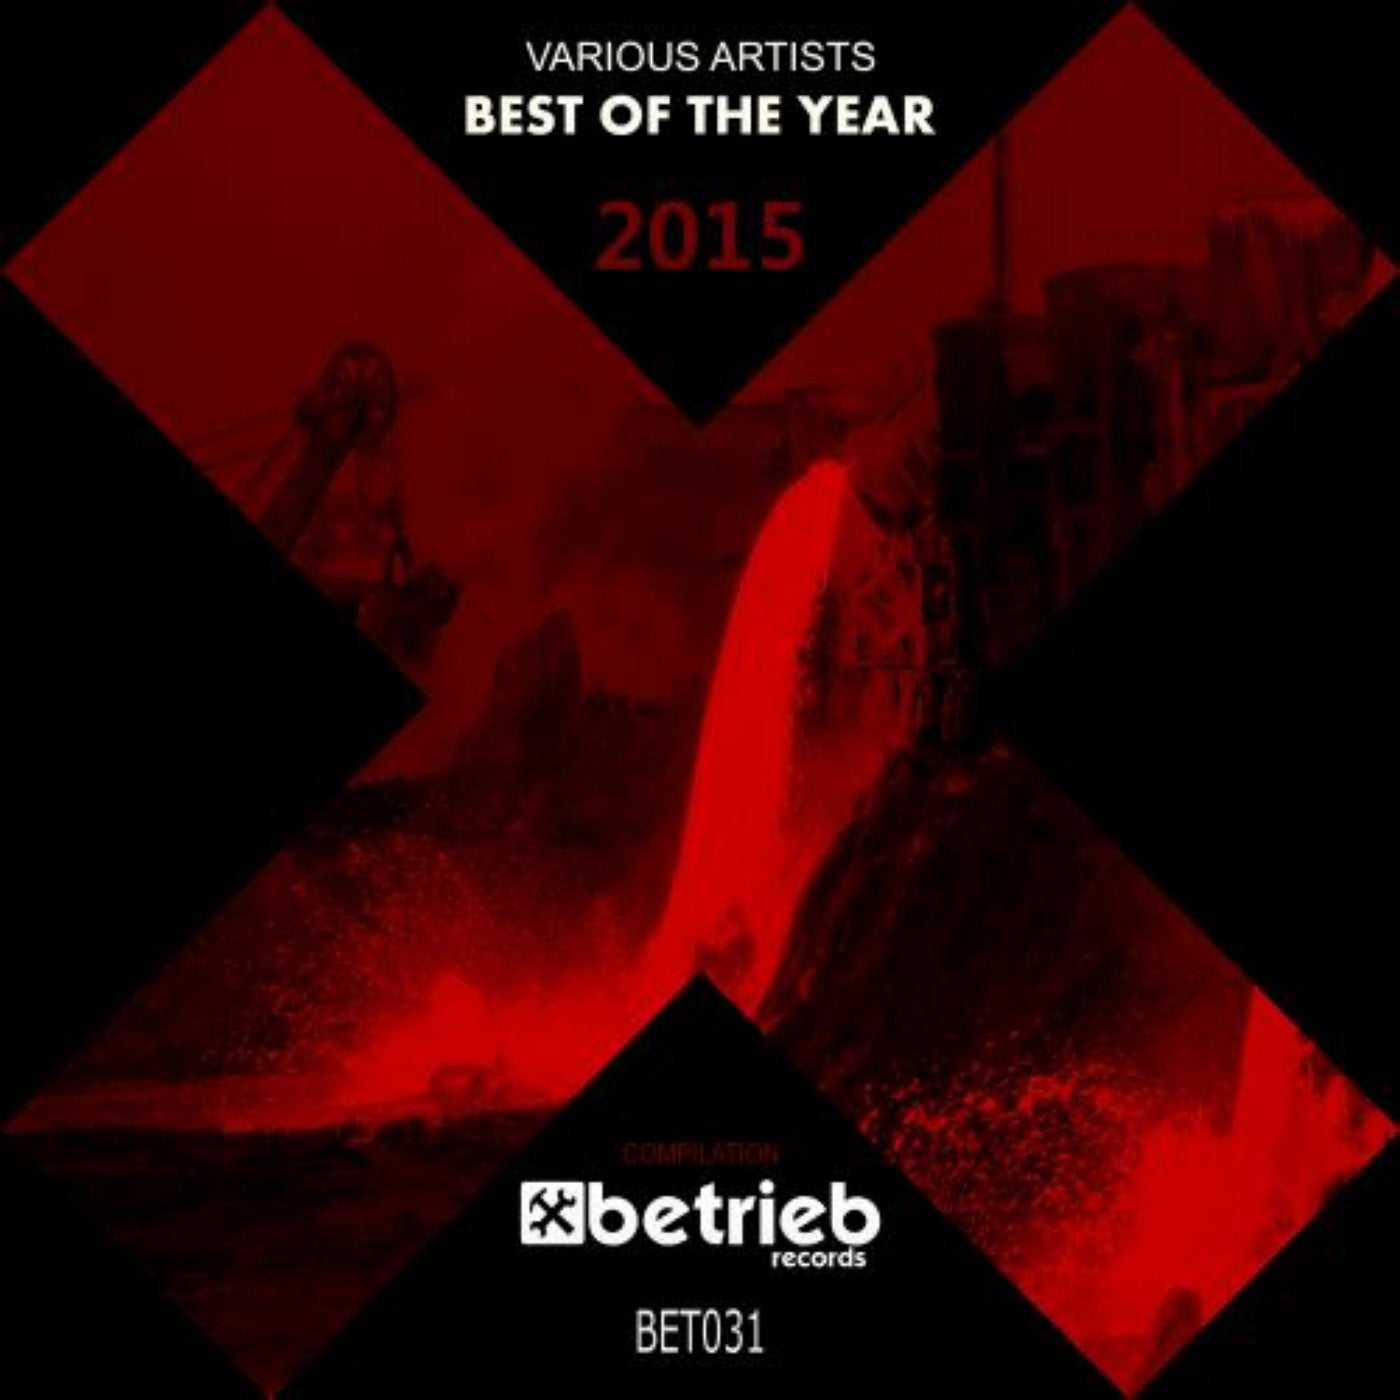 Best Of The Year 2015